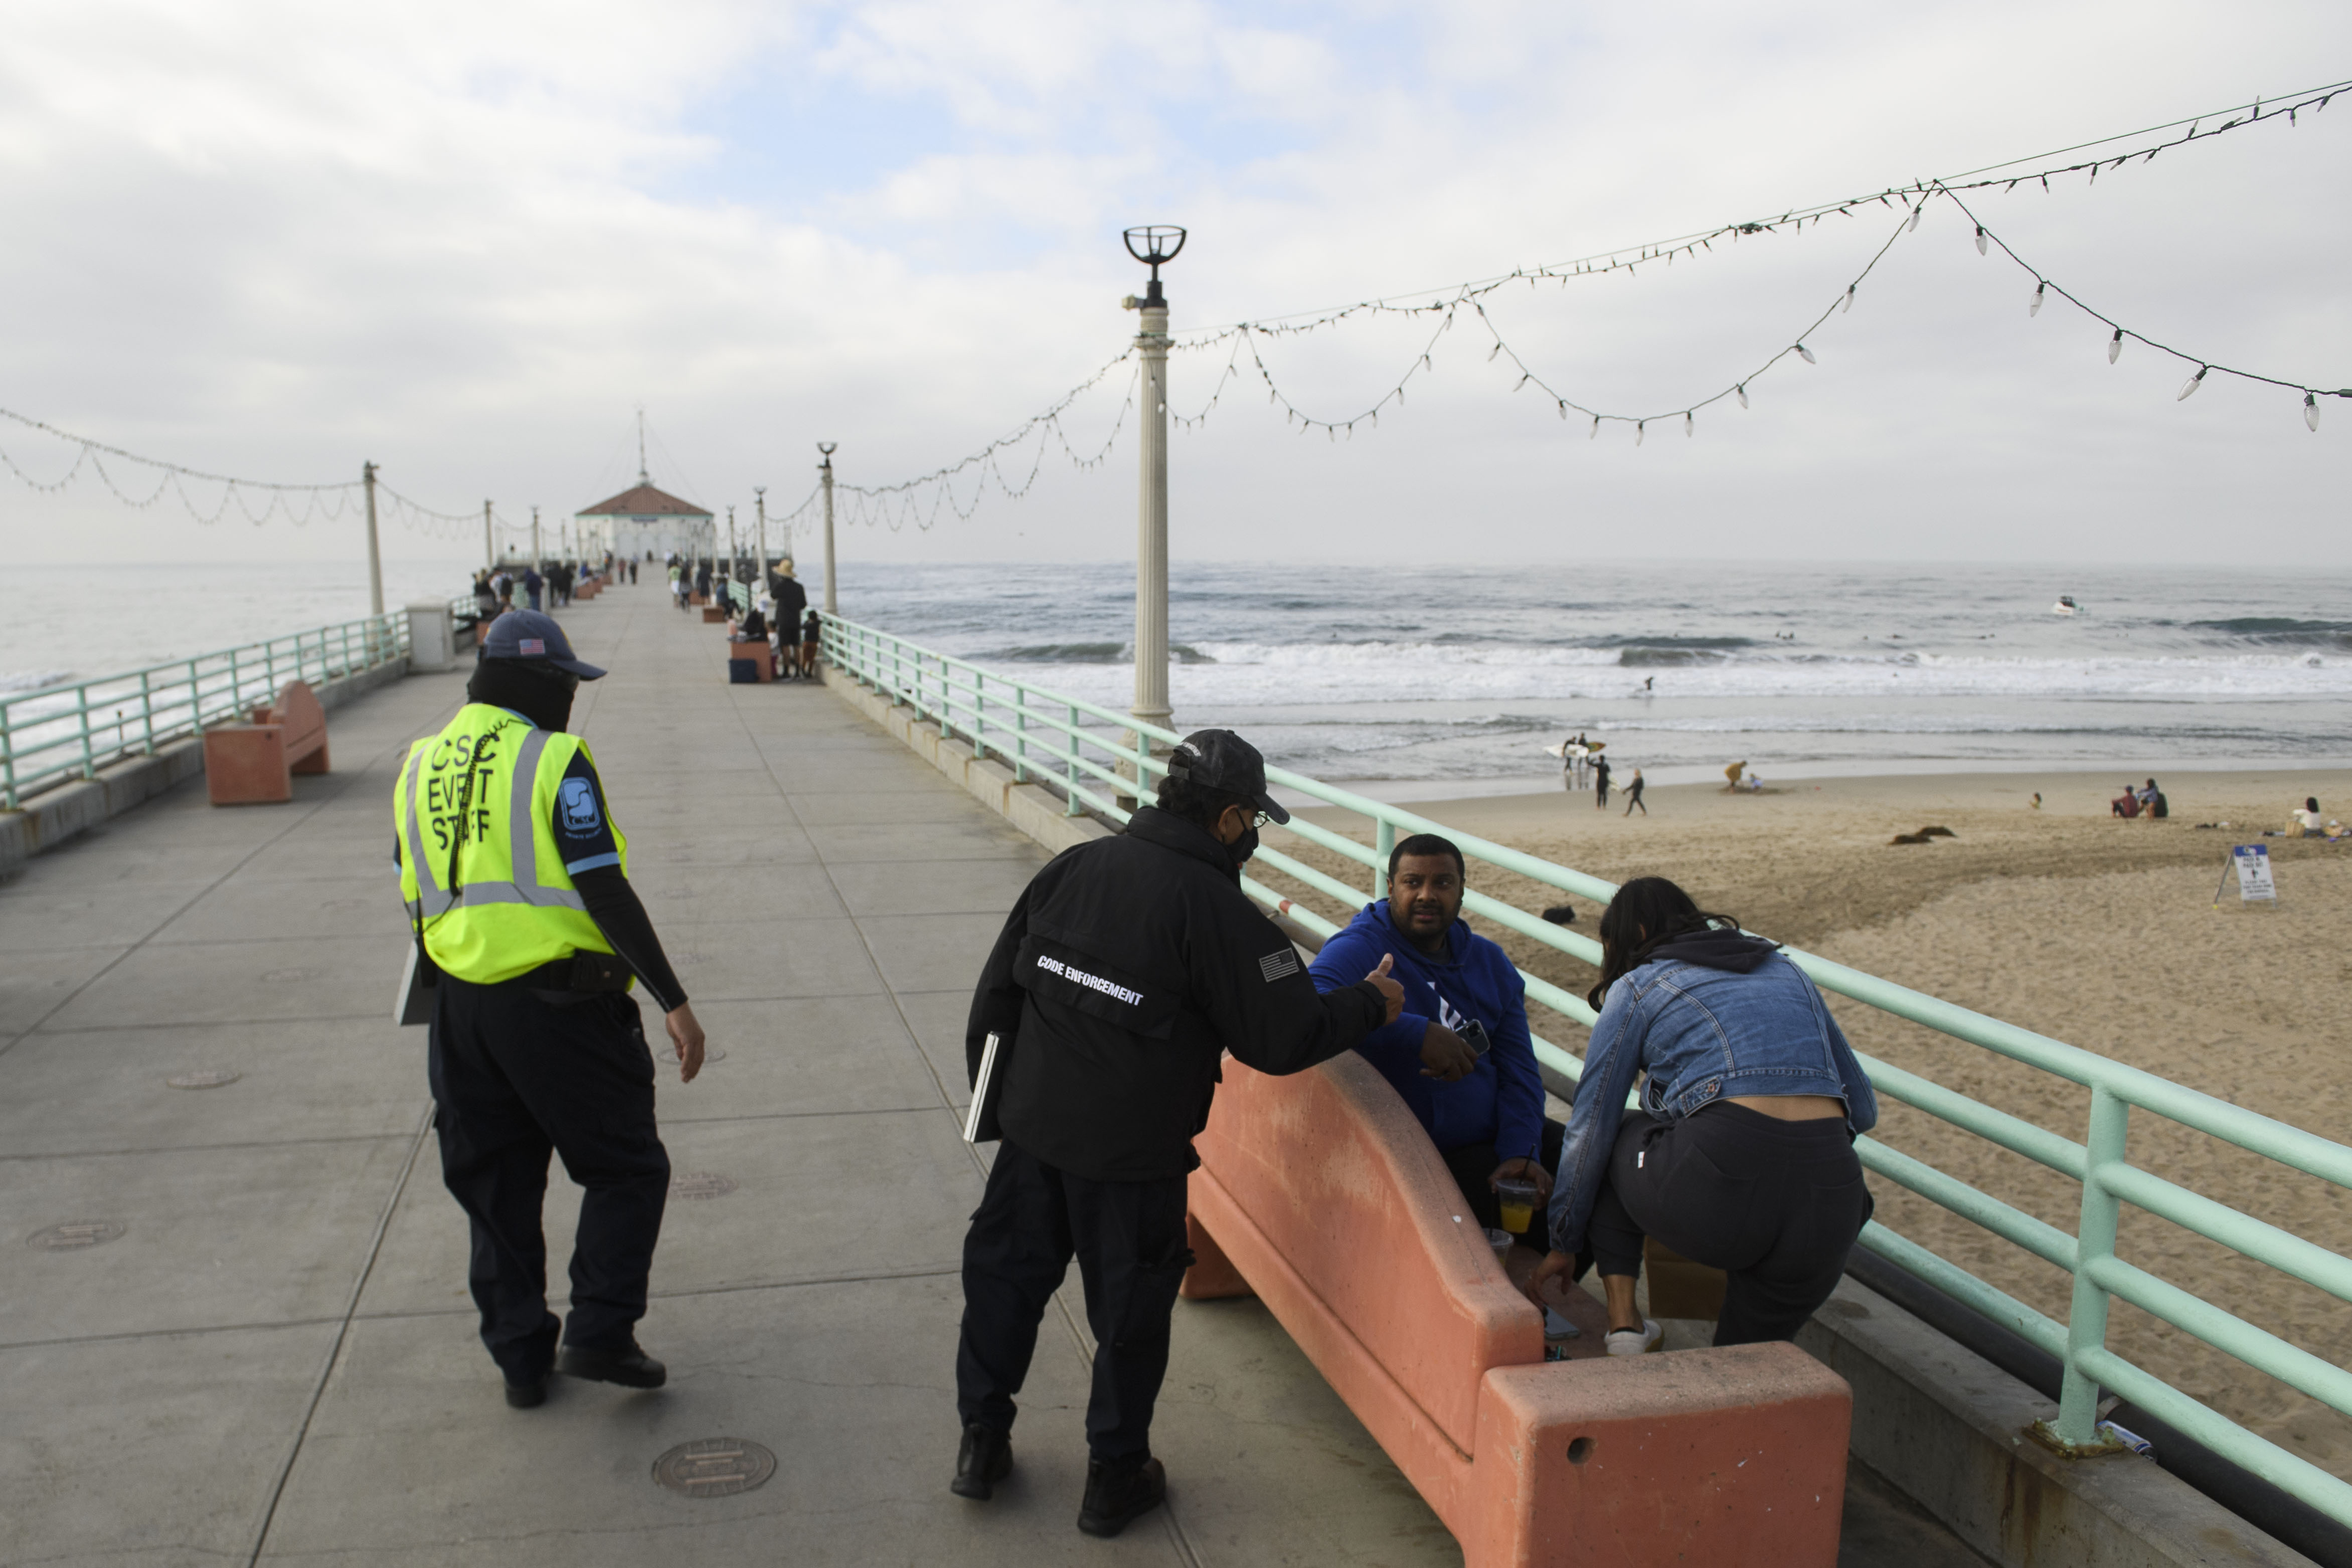 City workers enforce COVID-19 mask restrictions on the pier in Manhattan Beach, Calif., on Dec. 12, 2020. (Patrick T. Fallon—AFP/Getty Images)